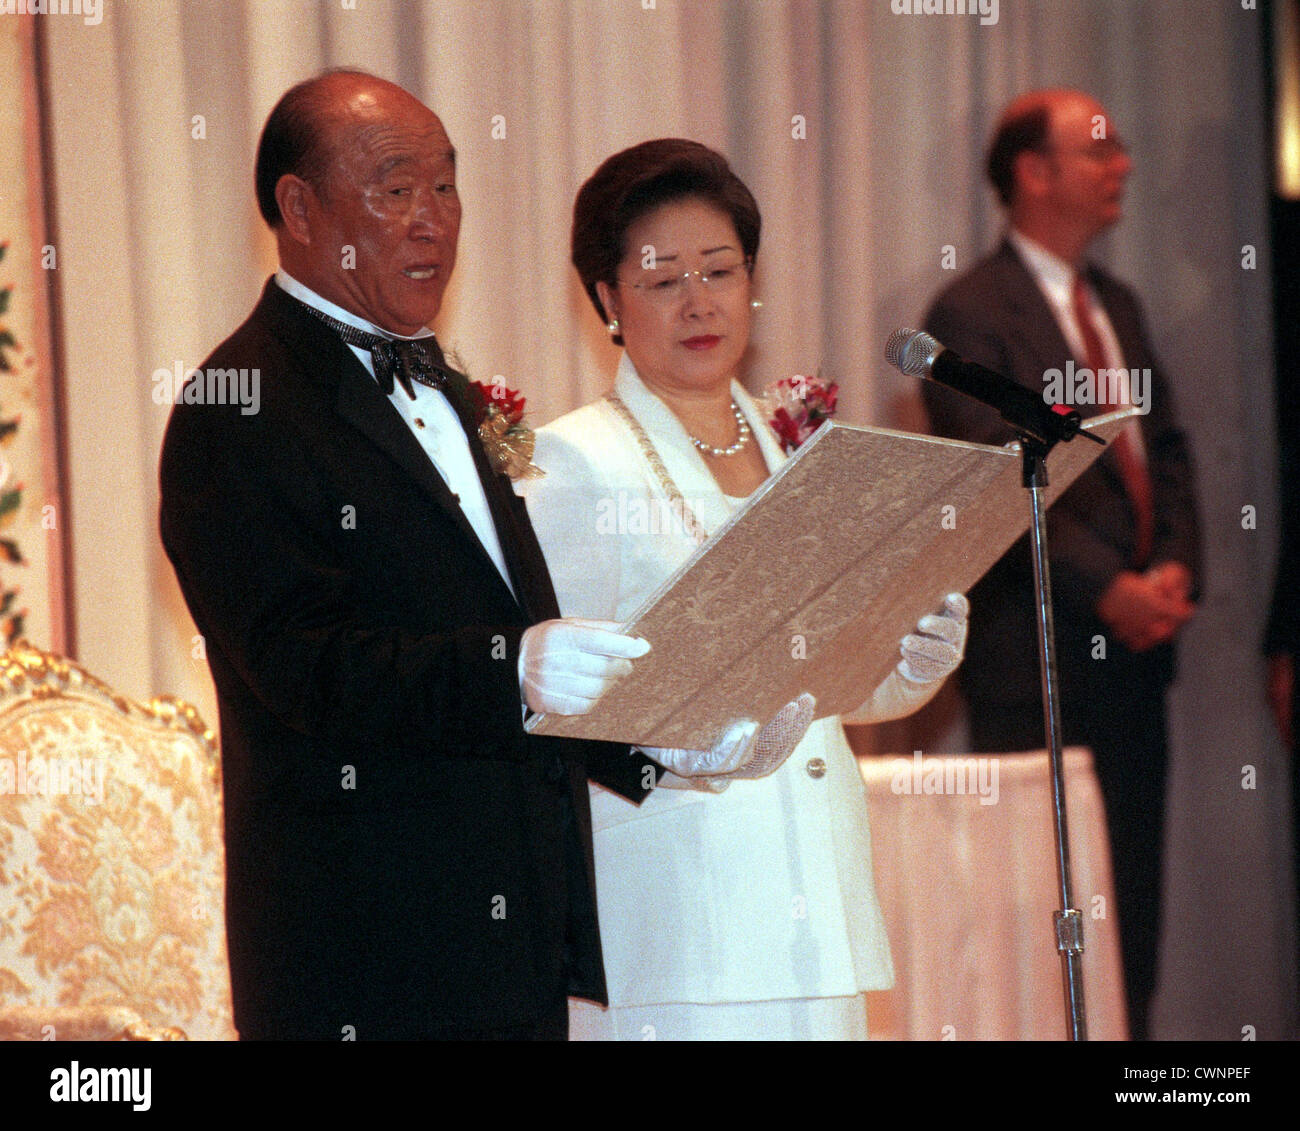 The Rev. and Mrs. Sun Myung Moon officiate their International Marriage Blessing Ceremony on May 27, 2001 Stock Photo